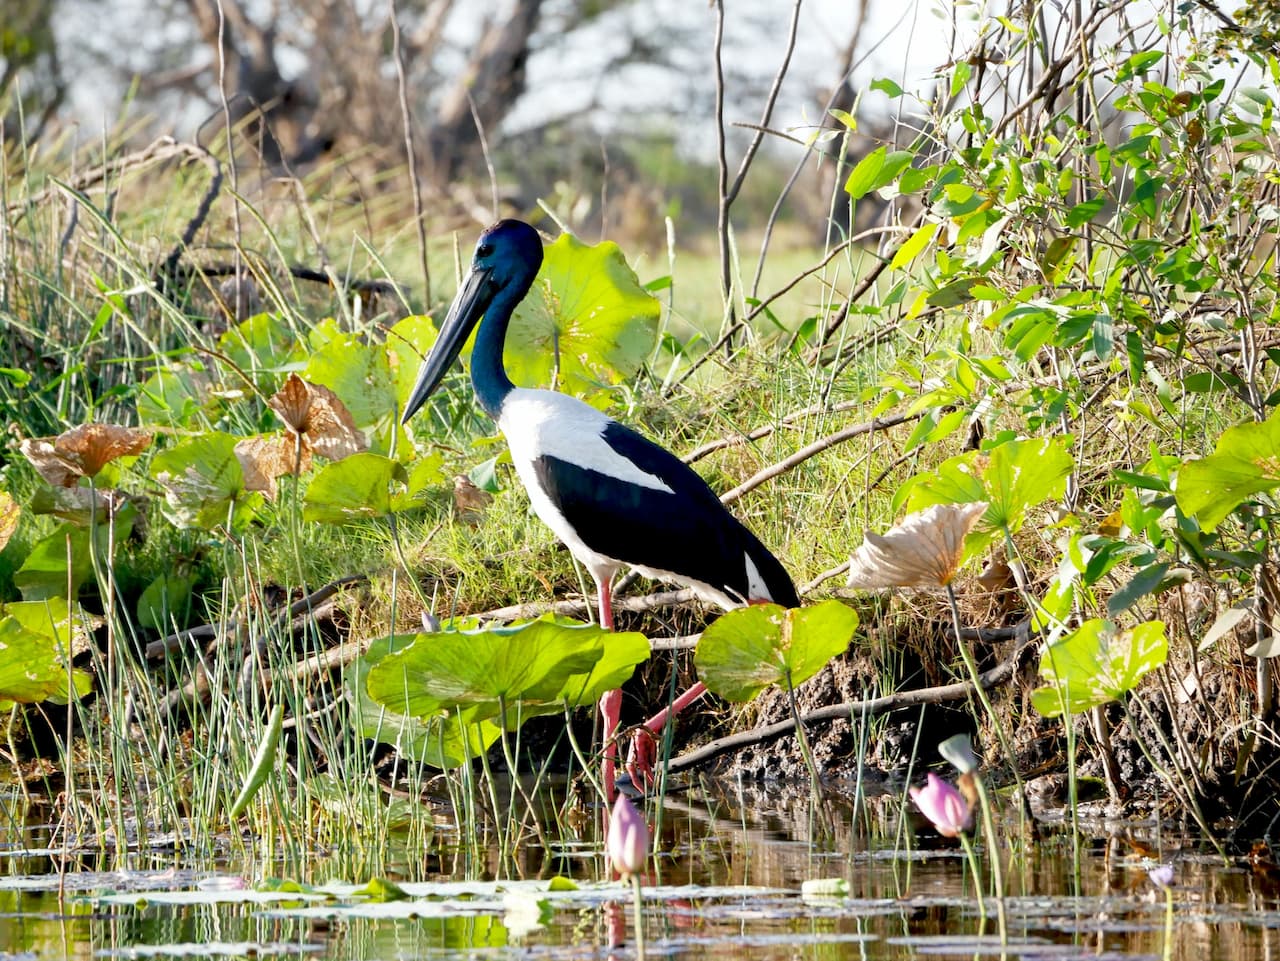 The Black-necked Stork Standing In The Water